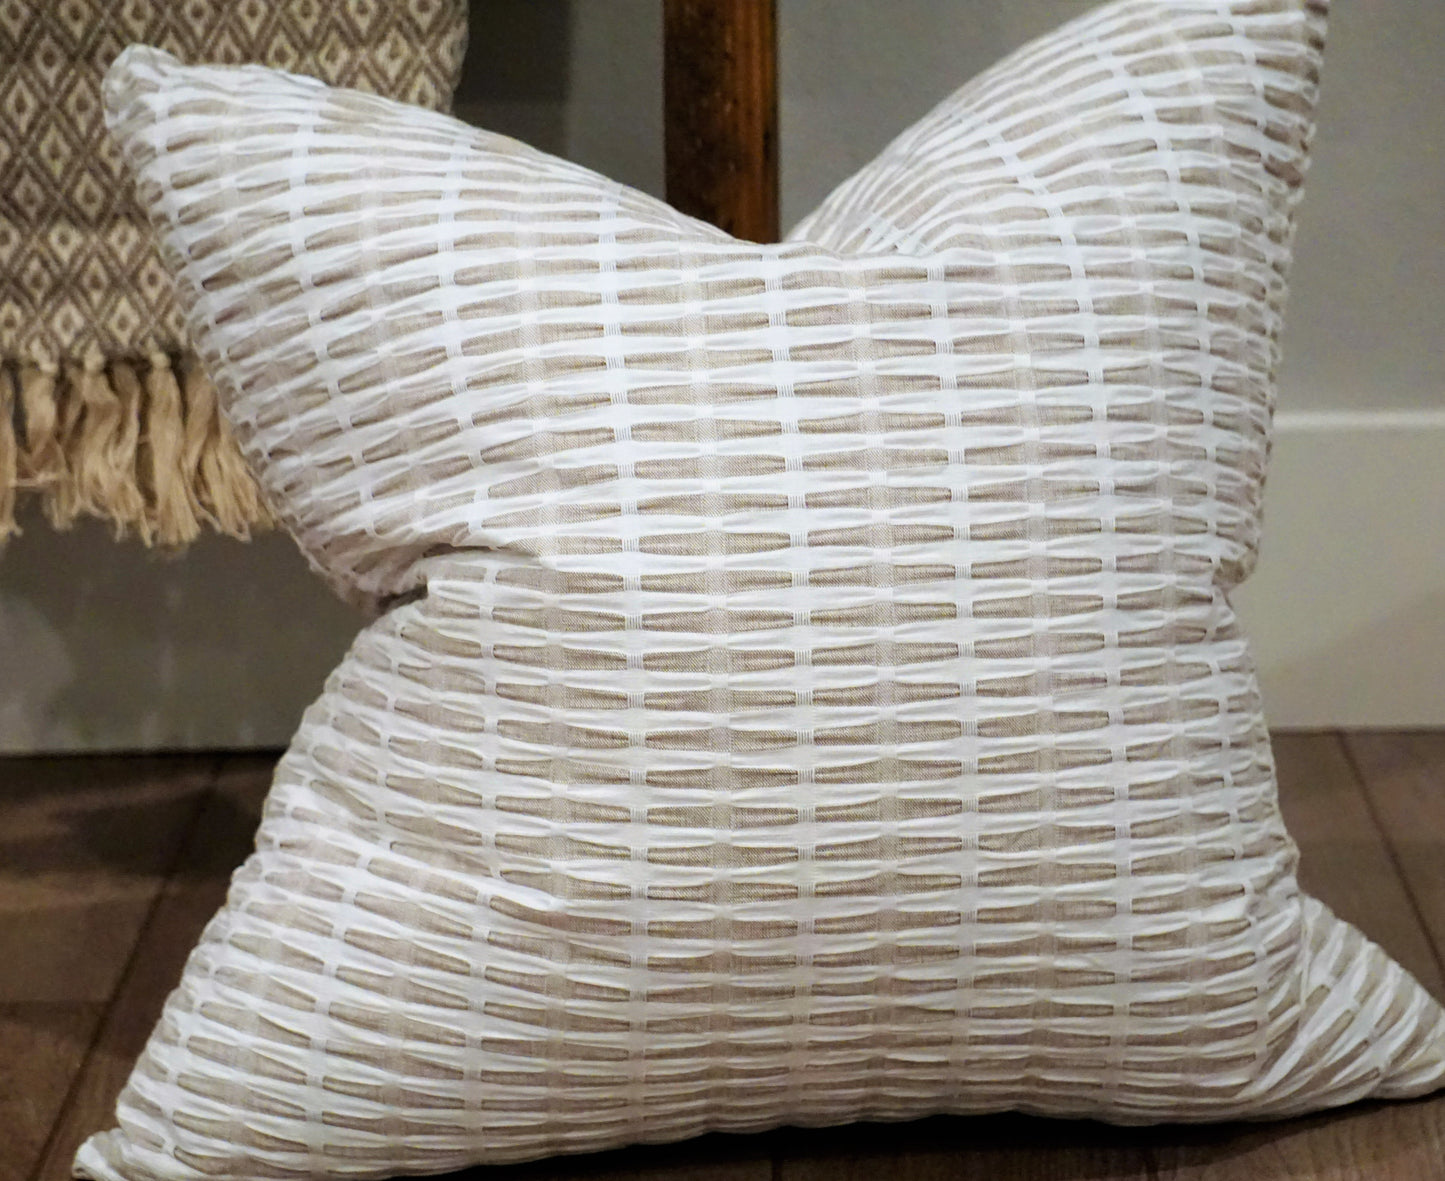 Feather Filled Throw Pillow